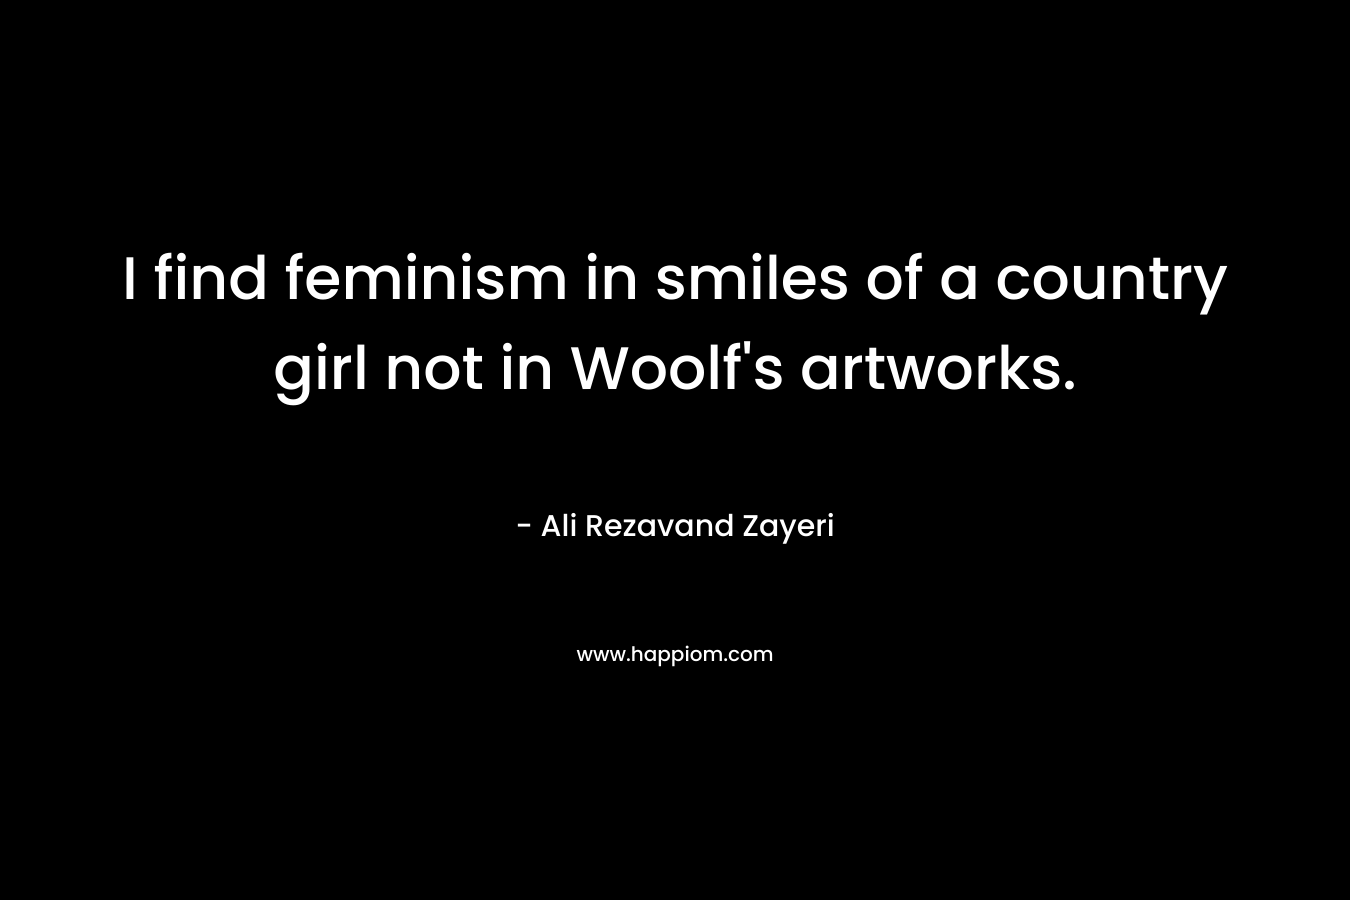 I find feminism in smiles of a country girl not in Woolf’s artworks. – Ali Rezavand Zayeri